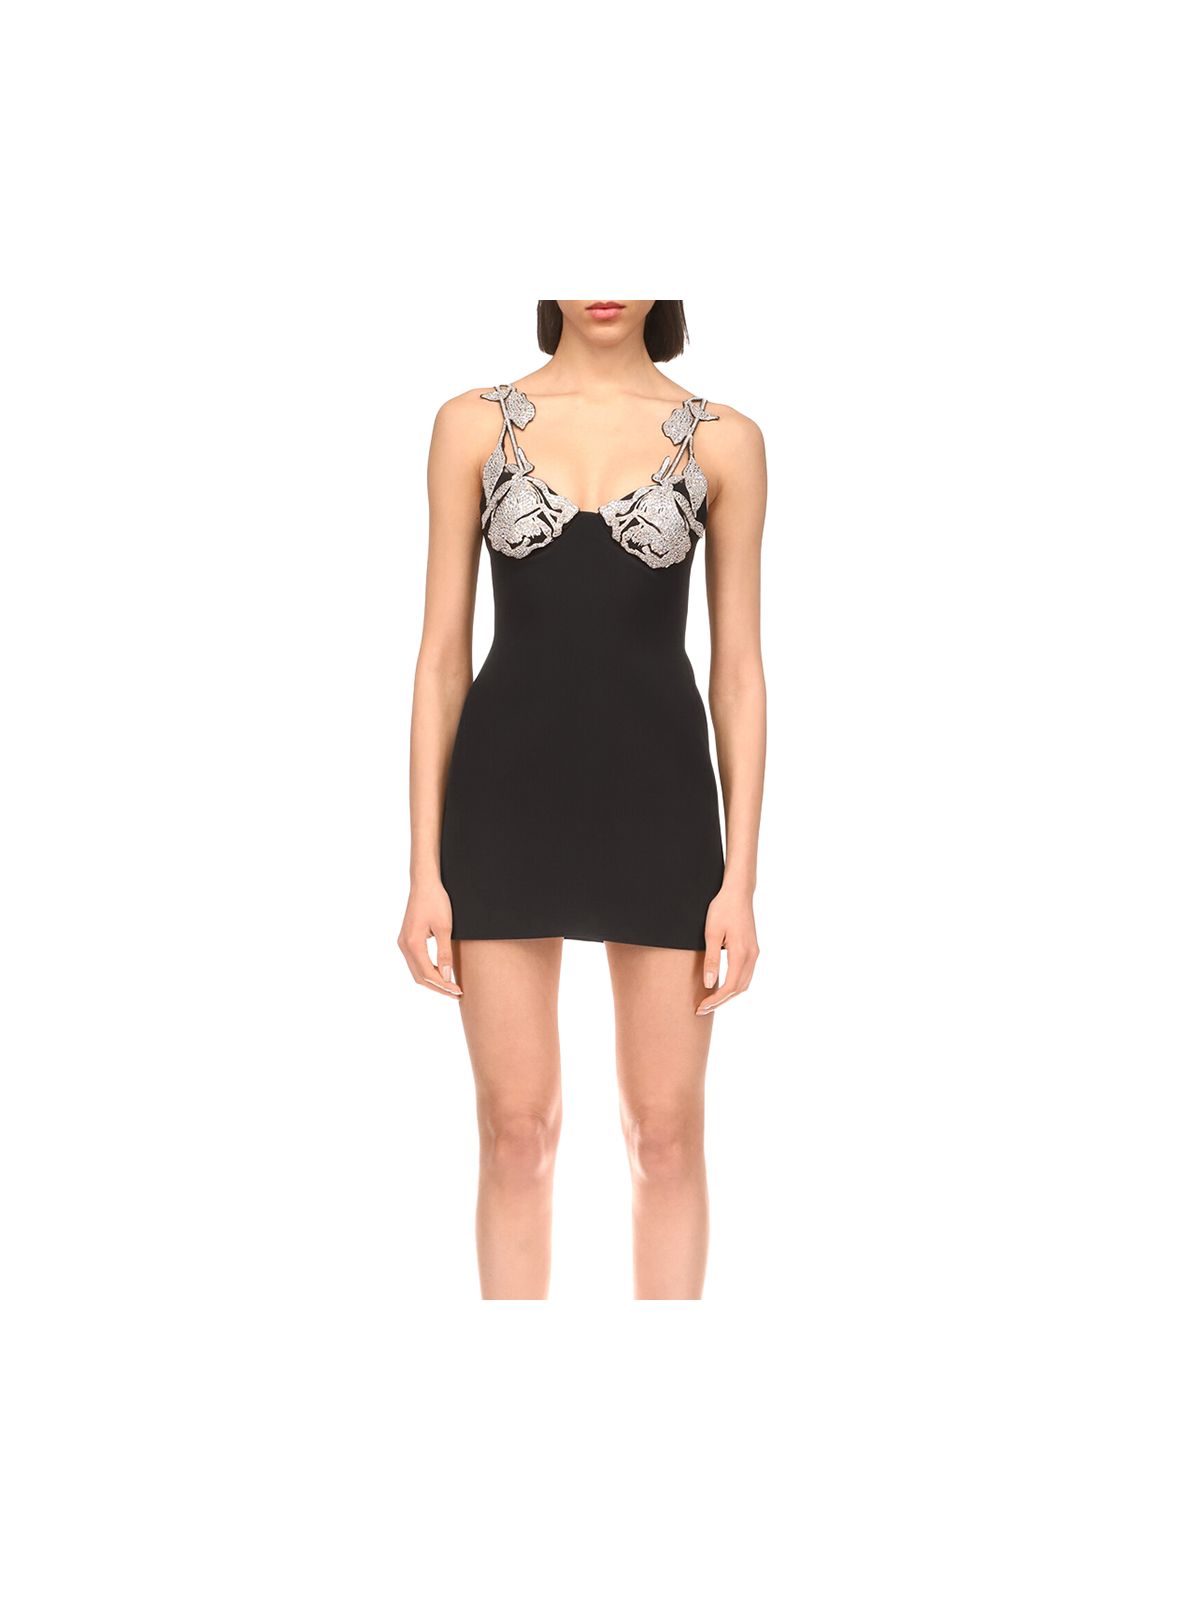 DAVID KOMA Womens Black Embellished Zippered Lined Embroidered padded Floral Spaghetti Strap Sweetheart Neckline Micro Mini Cocktail Sheath Dress 8